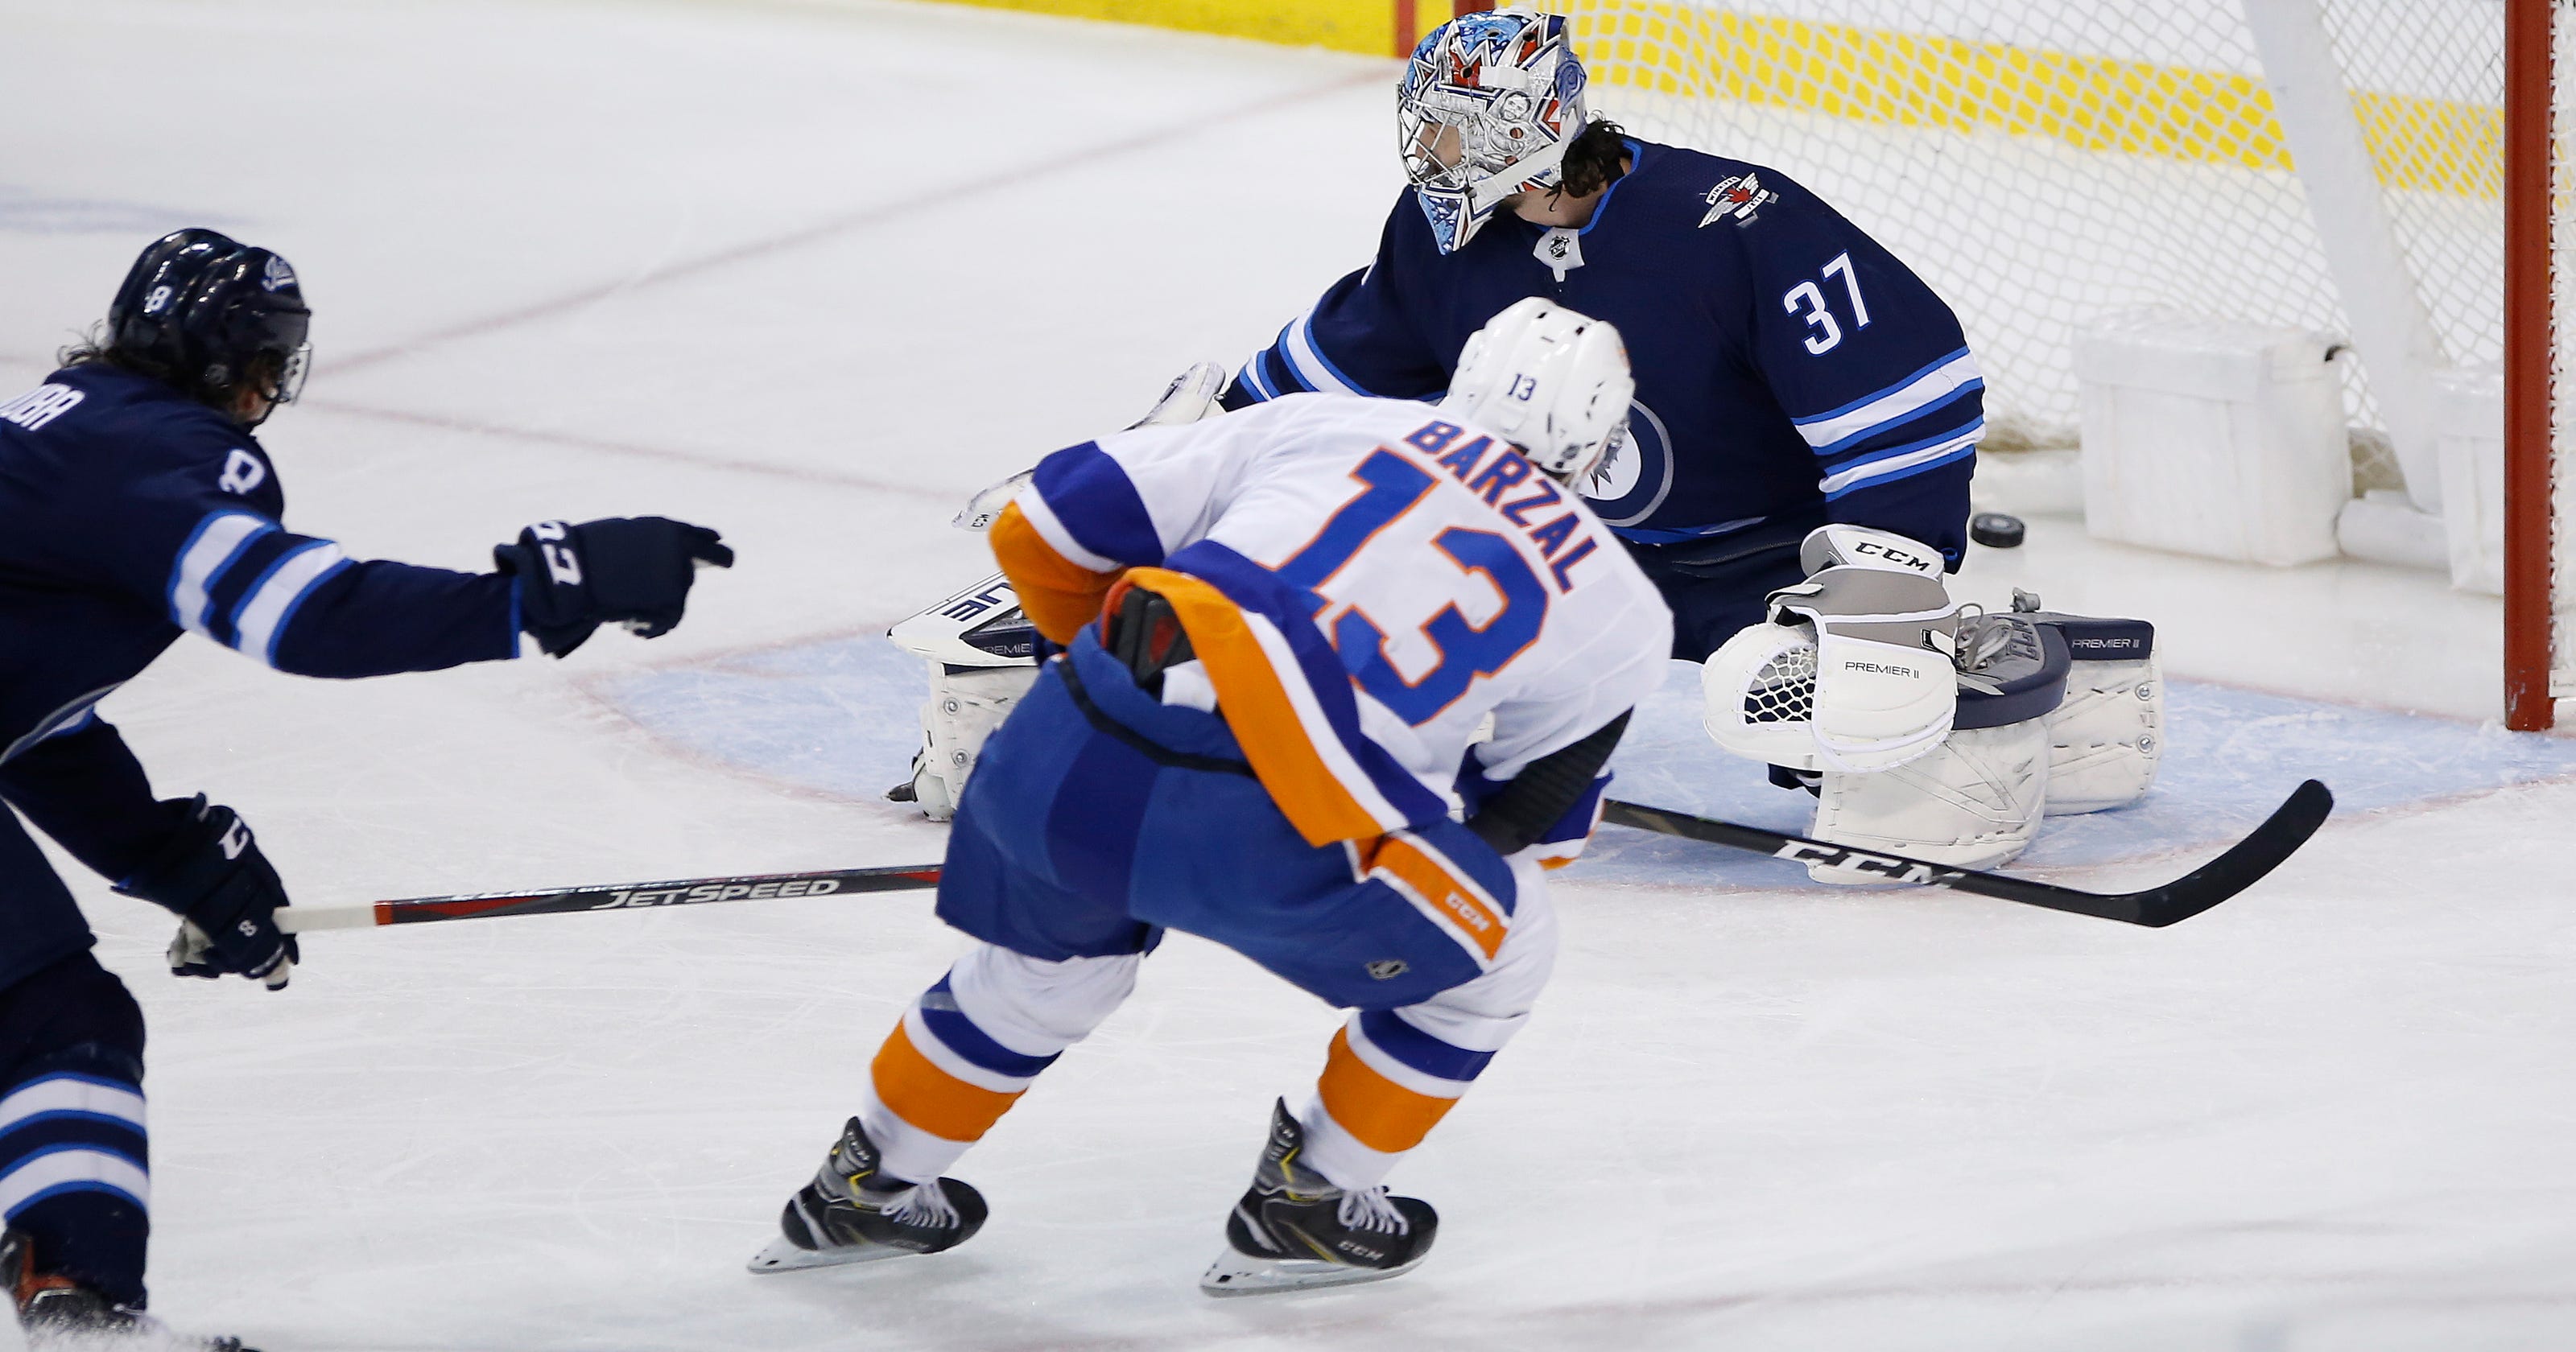 Islanders rally with 2 late goals to beat Jets 5-4